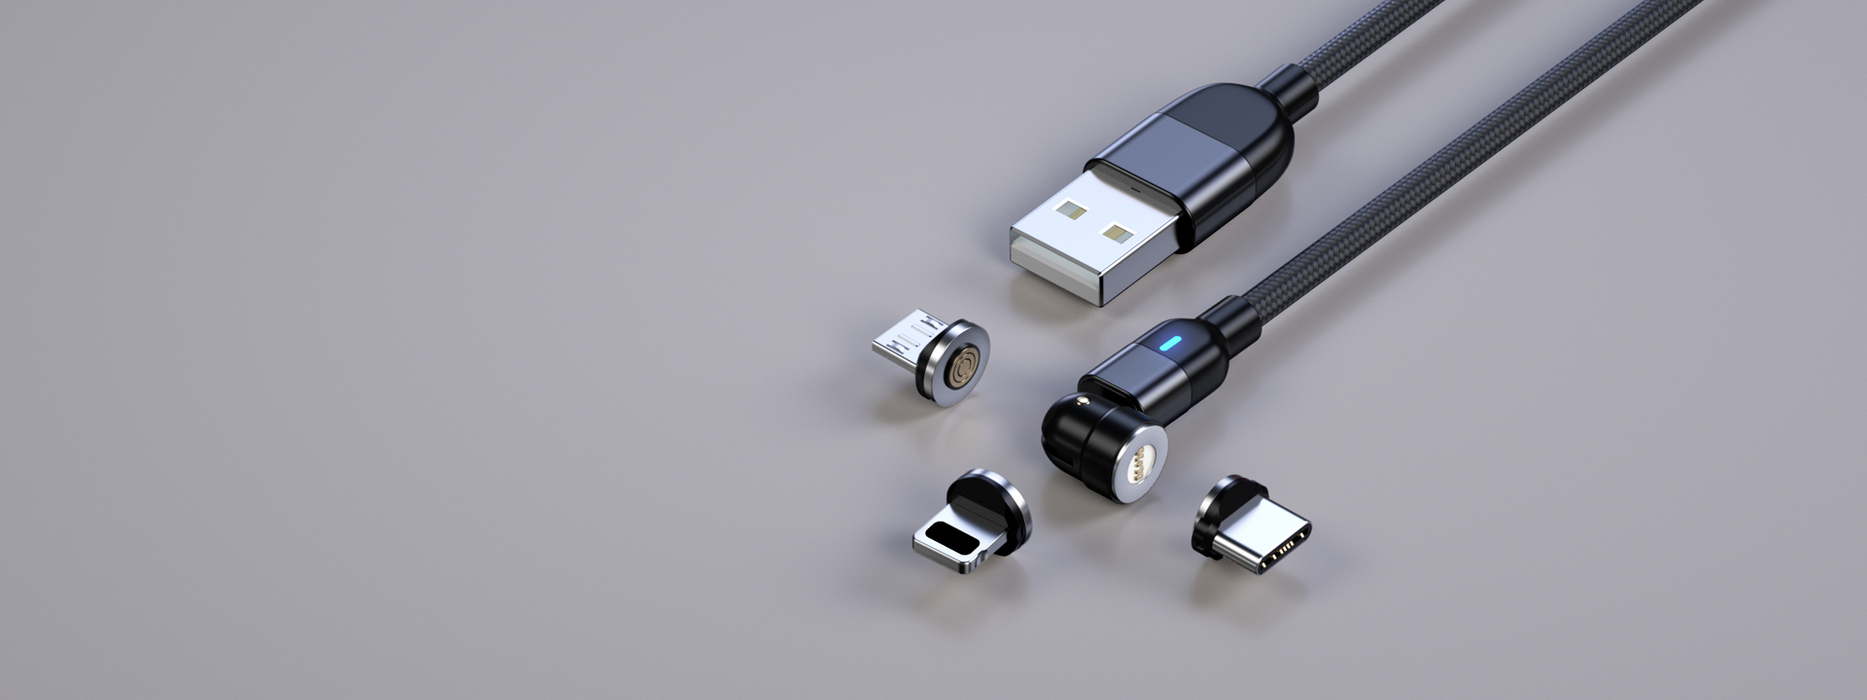 540 Degree Magnetic Cable